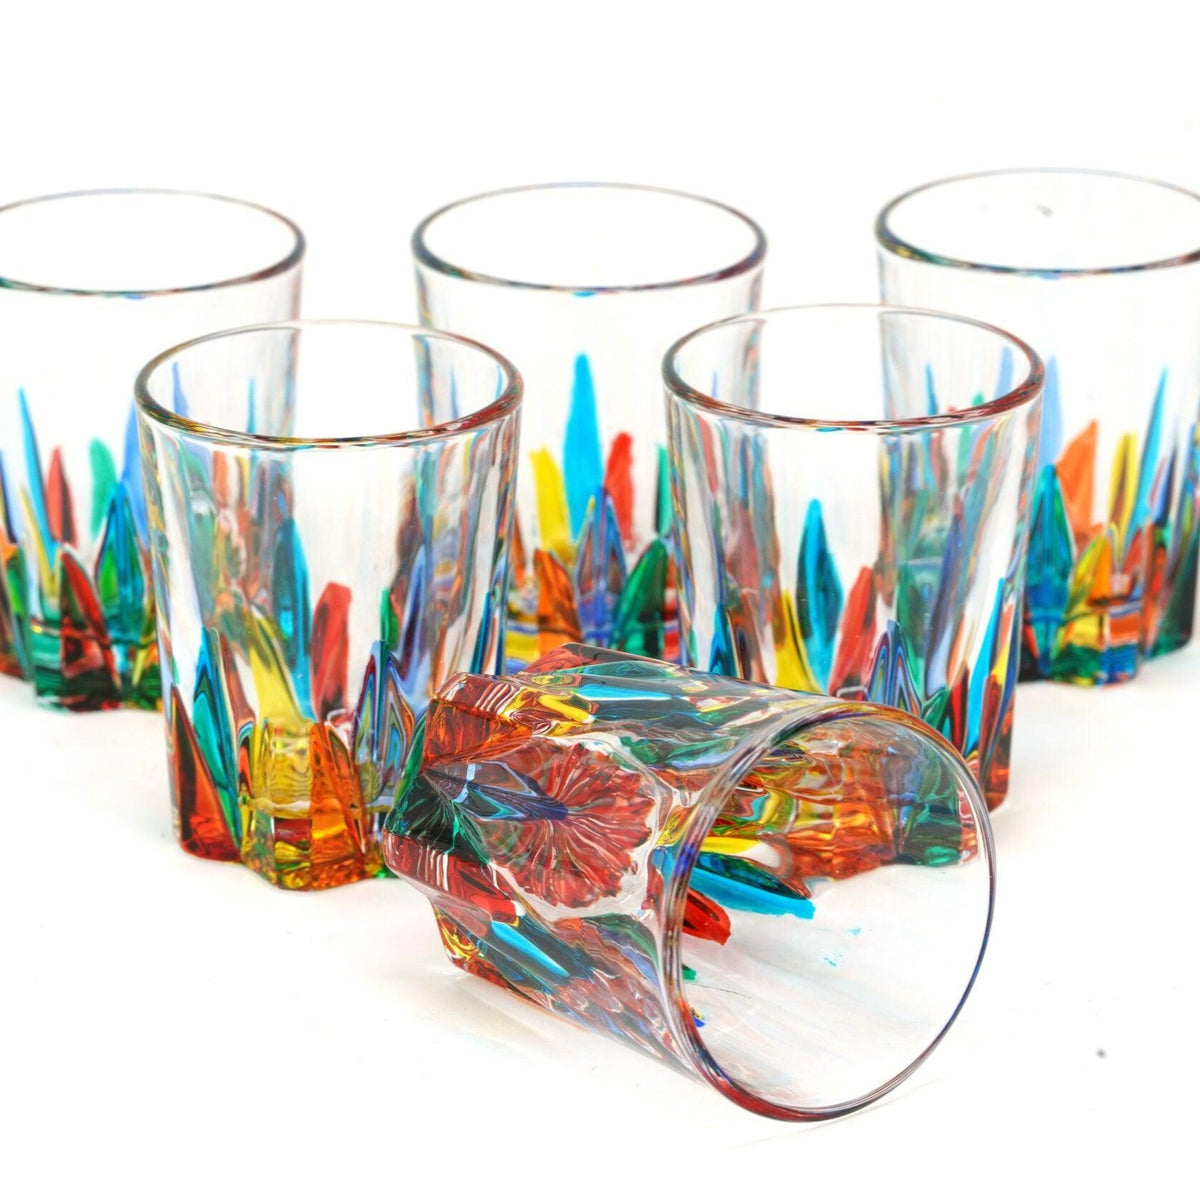 Gala Shot Glasses, Set of 6, Hand Painted Crystal, Made in Italy - MyItalianDecor